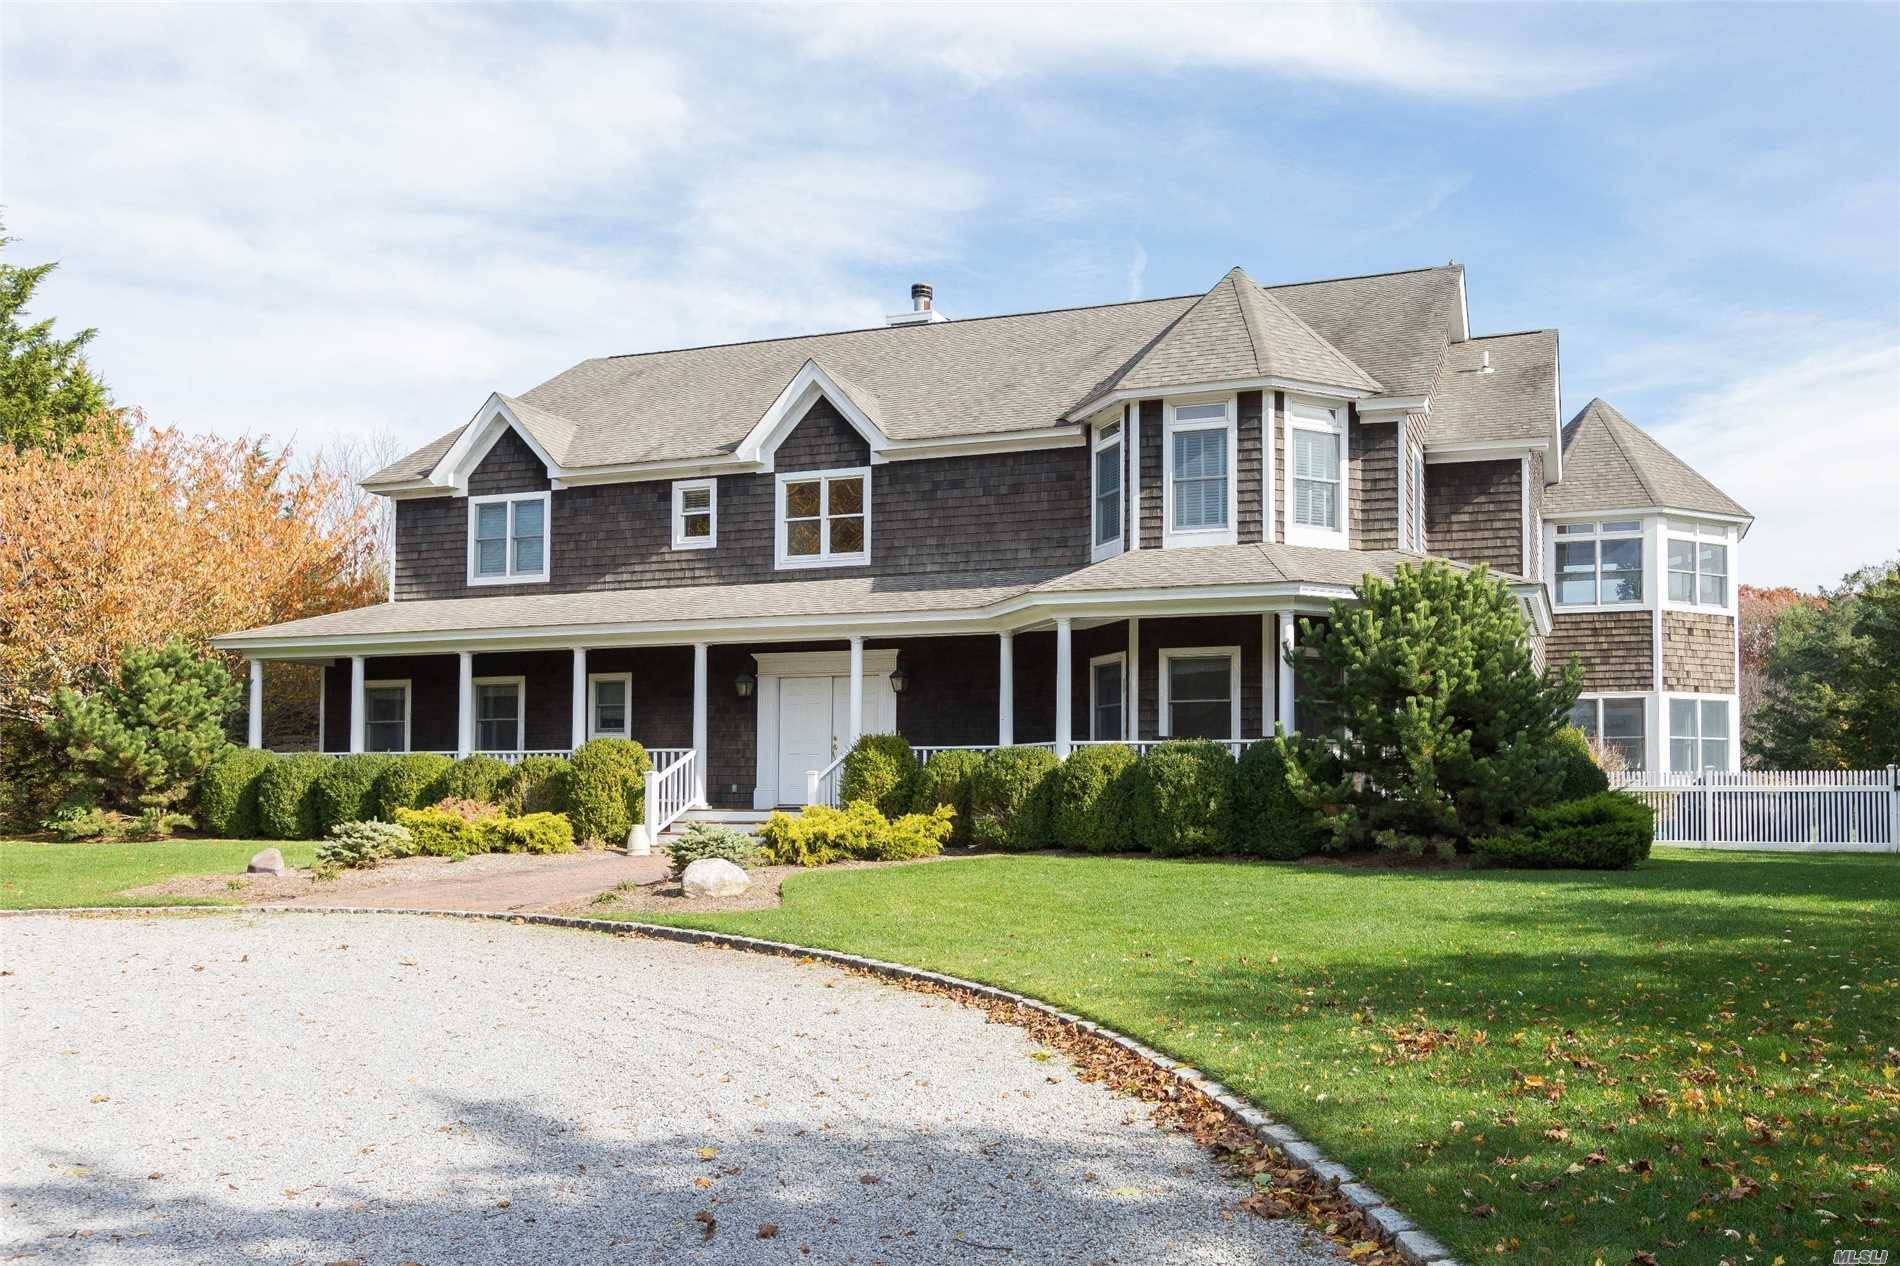 Summer Living Is A Dream In This Perfect Quogue Traditional.